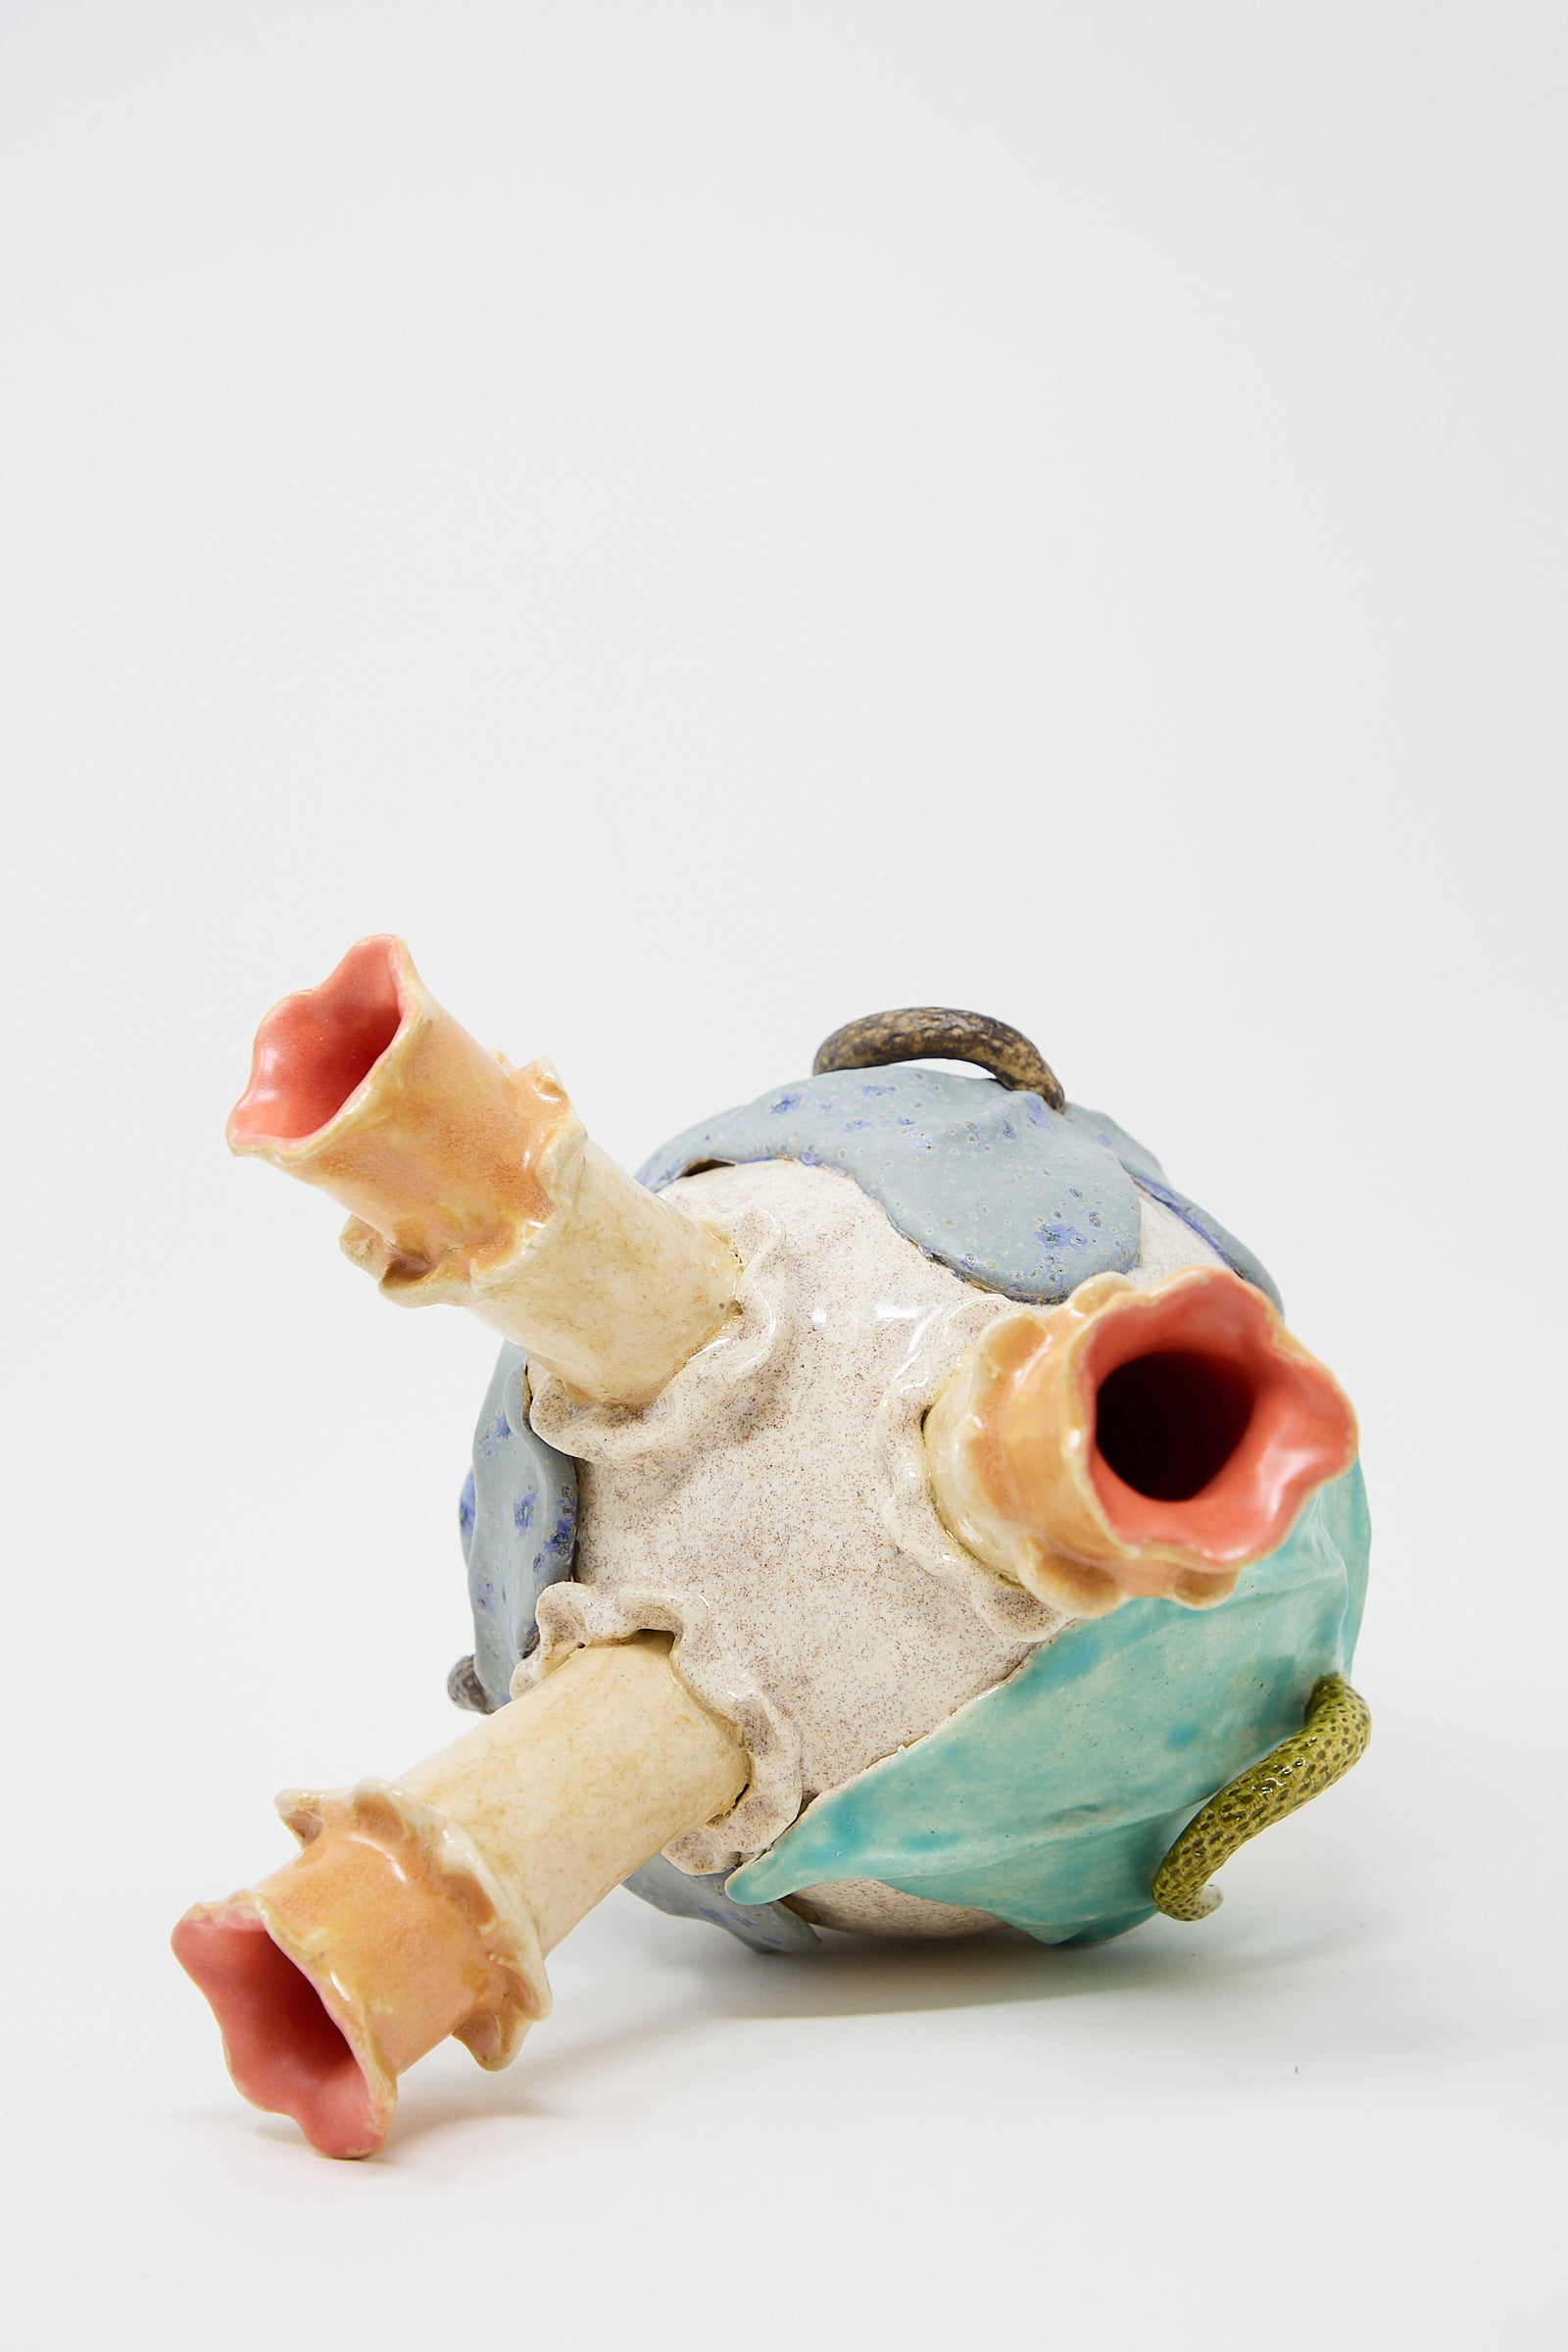 A colorful ceramic sculpture resembling a Floral Triple Vase by Pearce Williams, with blue and neutral tones, set against a white background. This piece is representative of New Orleans ceramics.